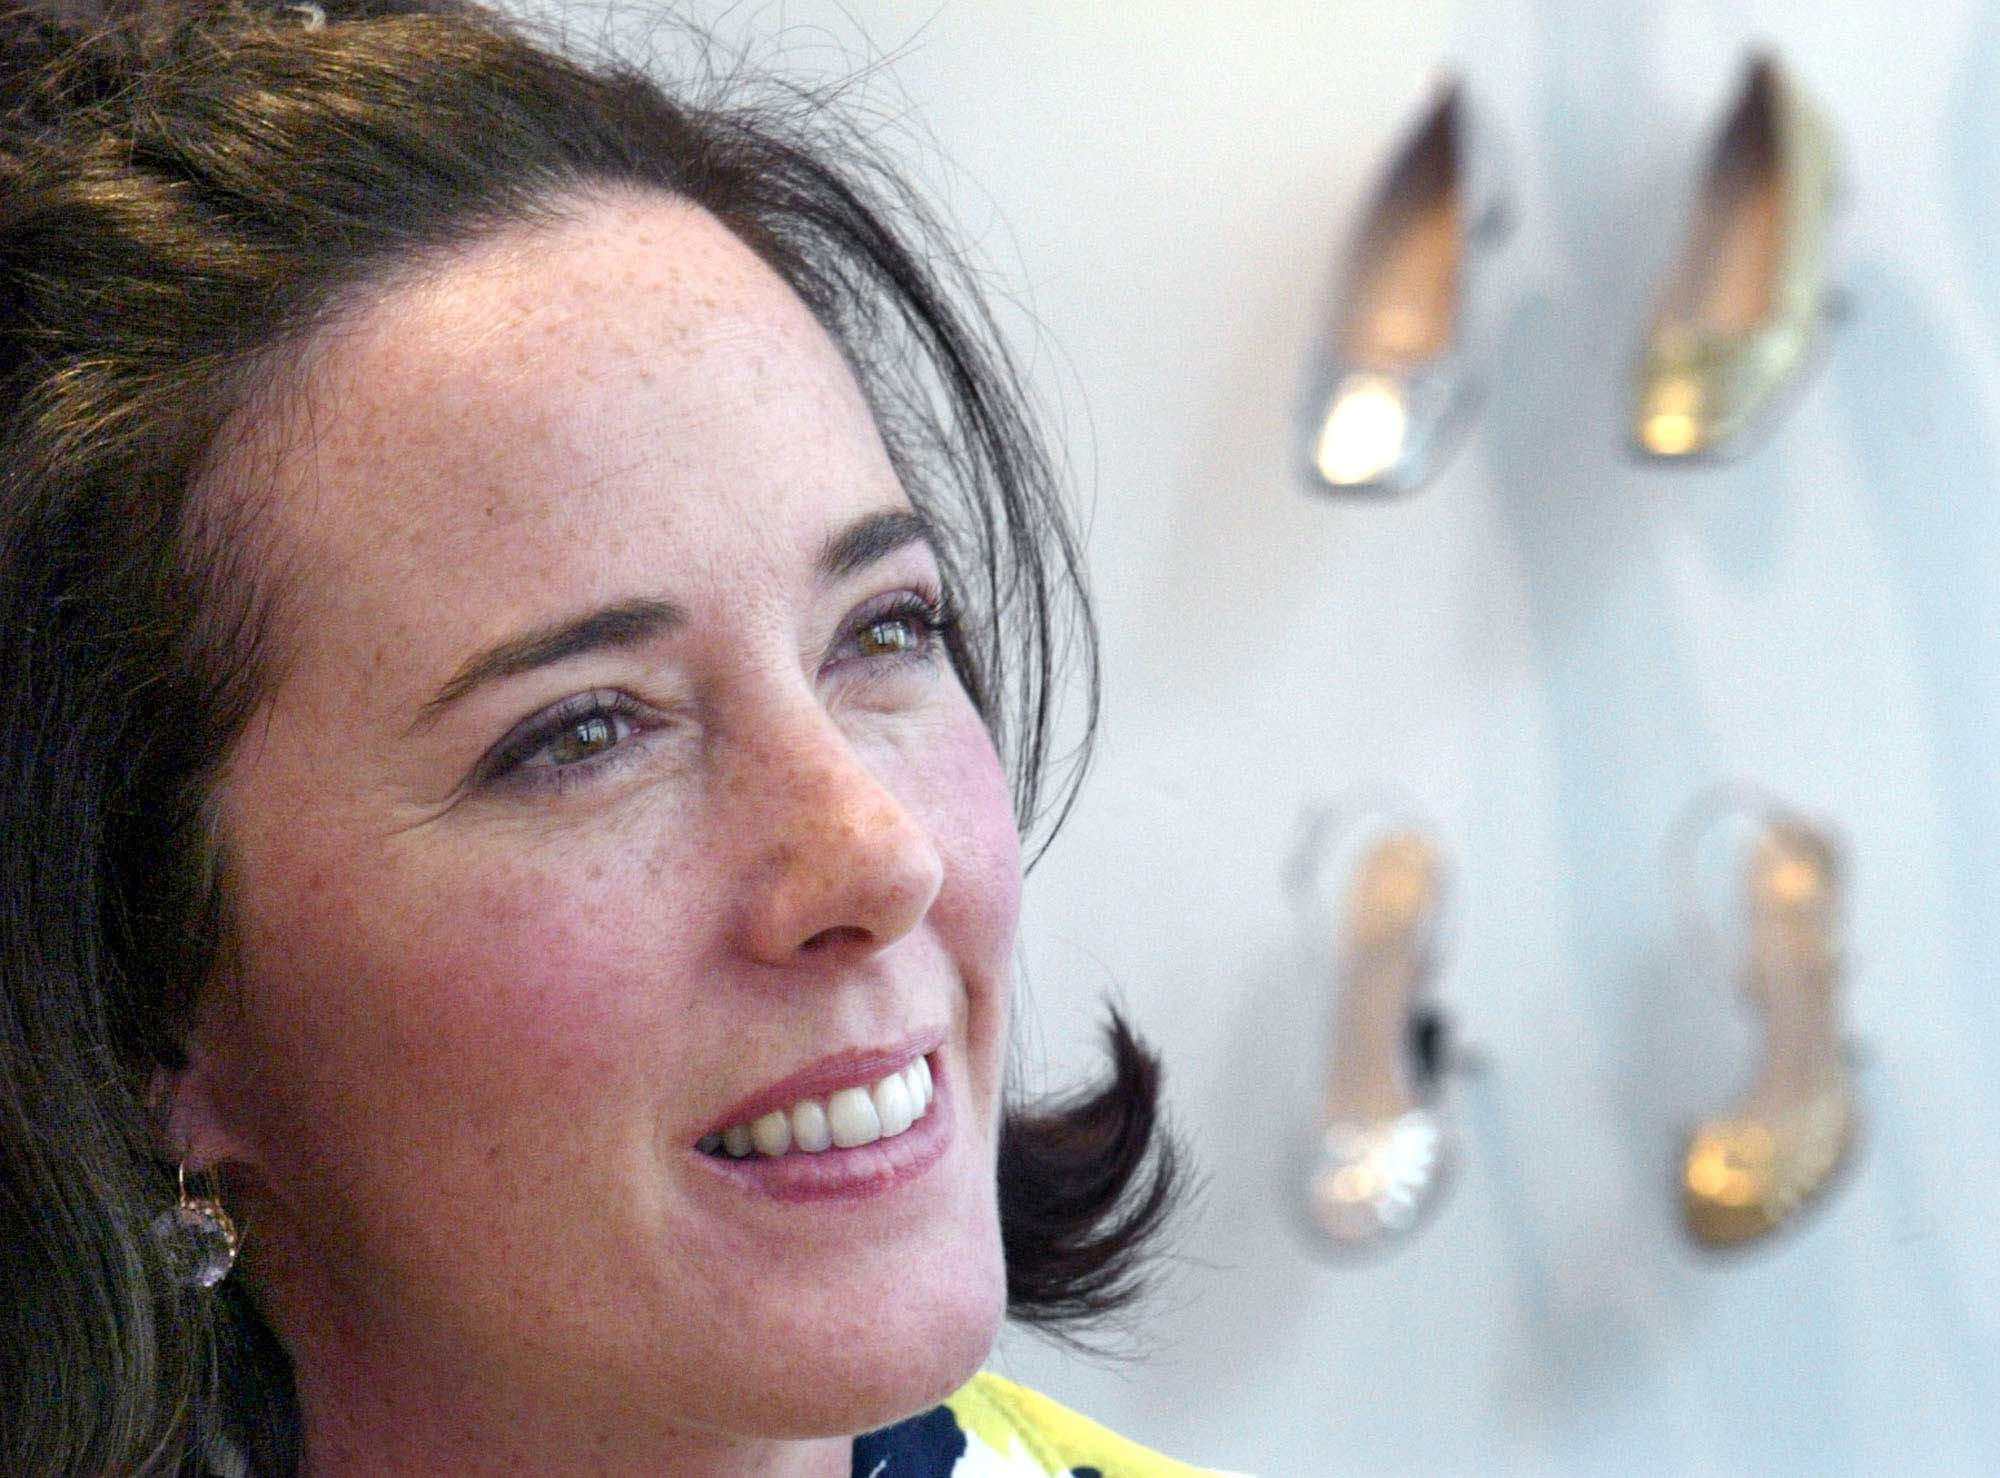 Kate Spade death: Suicide note addressed to daughter; sister 